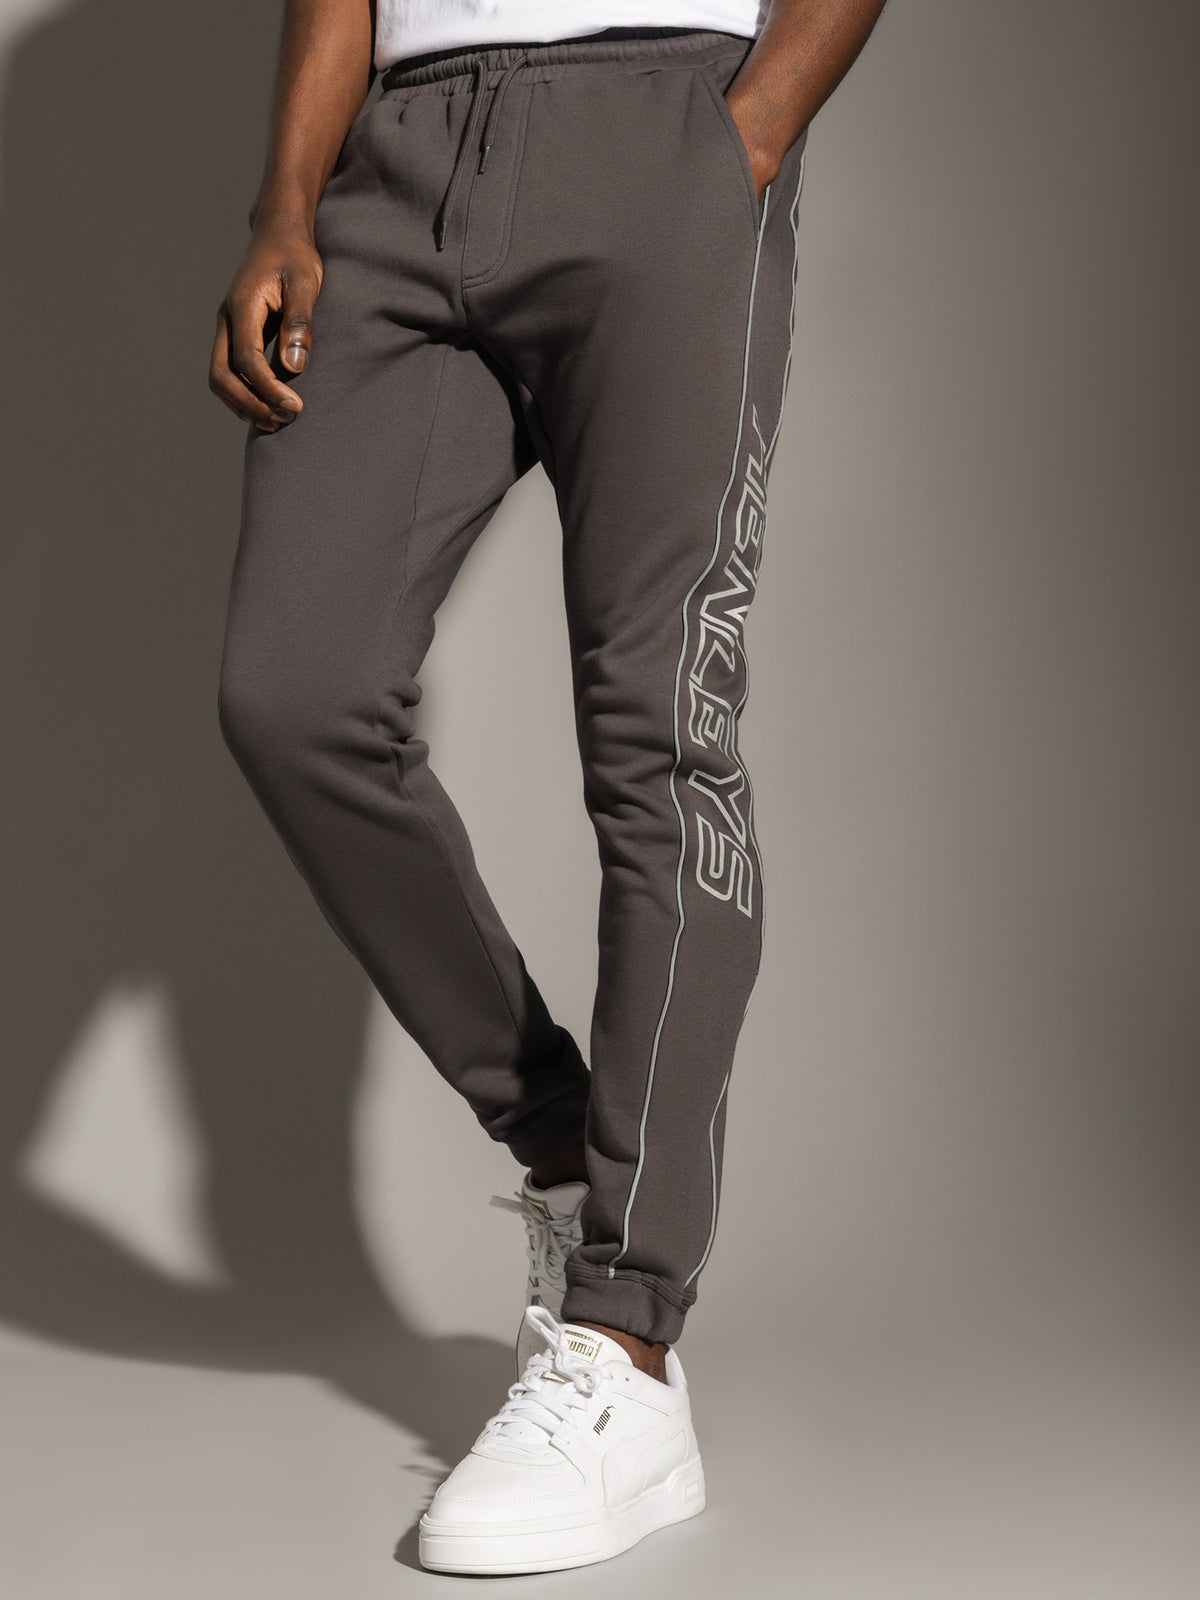 Master Reflective Trackpants in Coal Grey